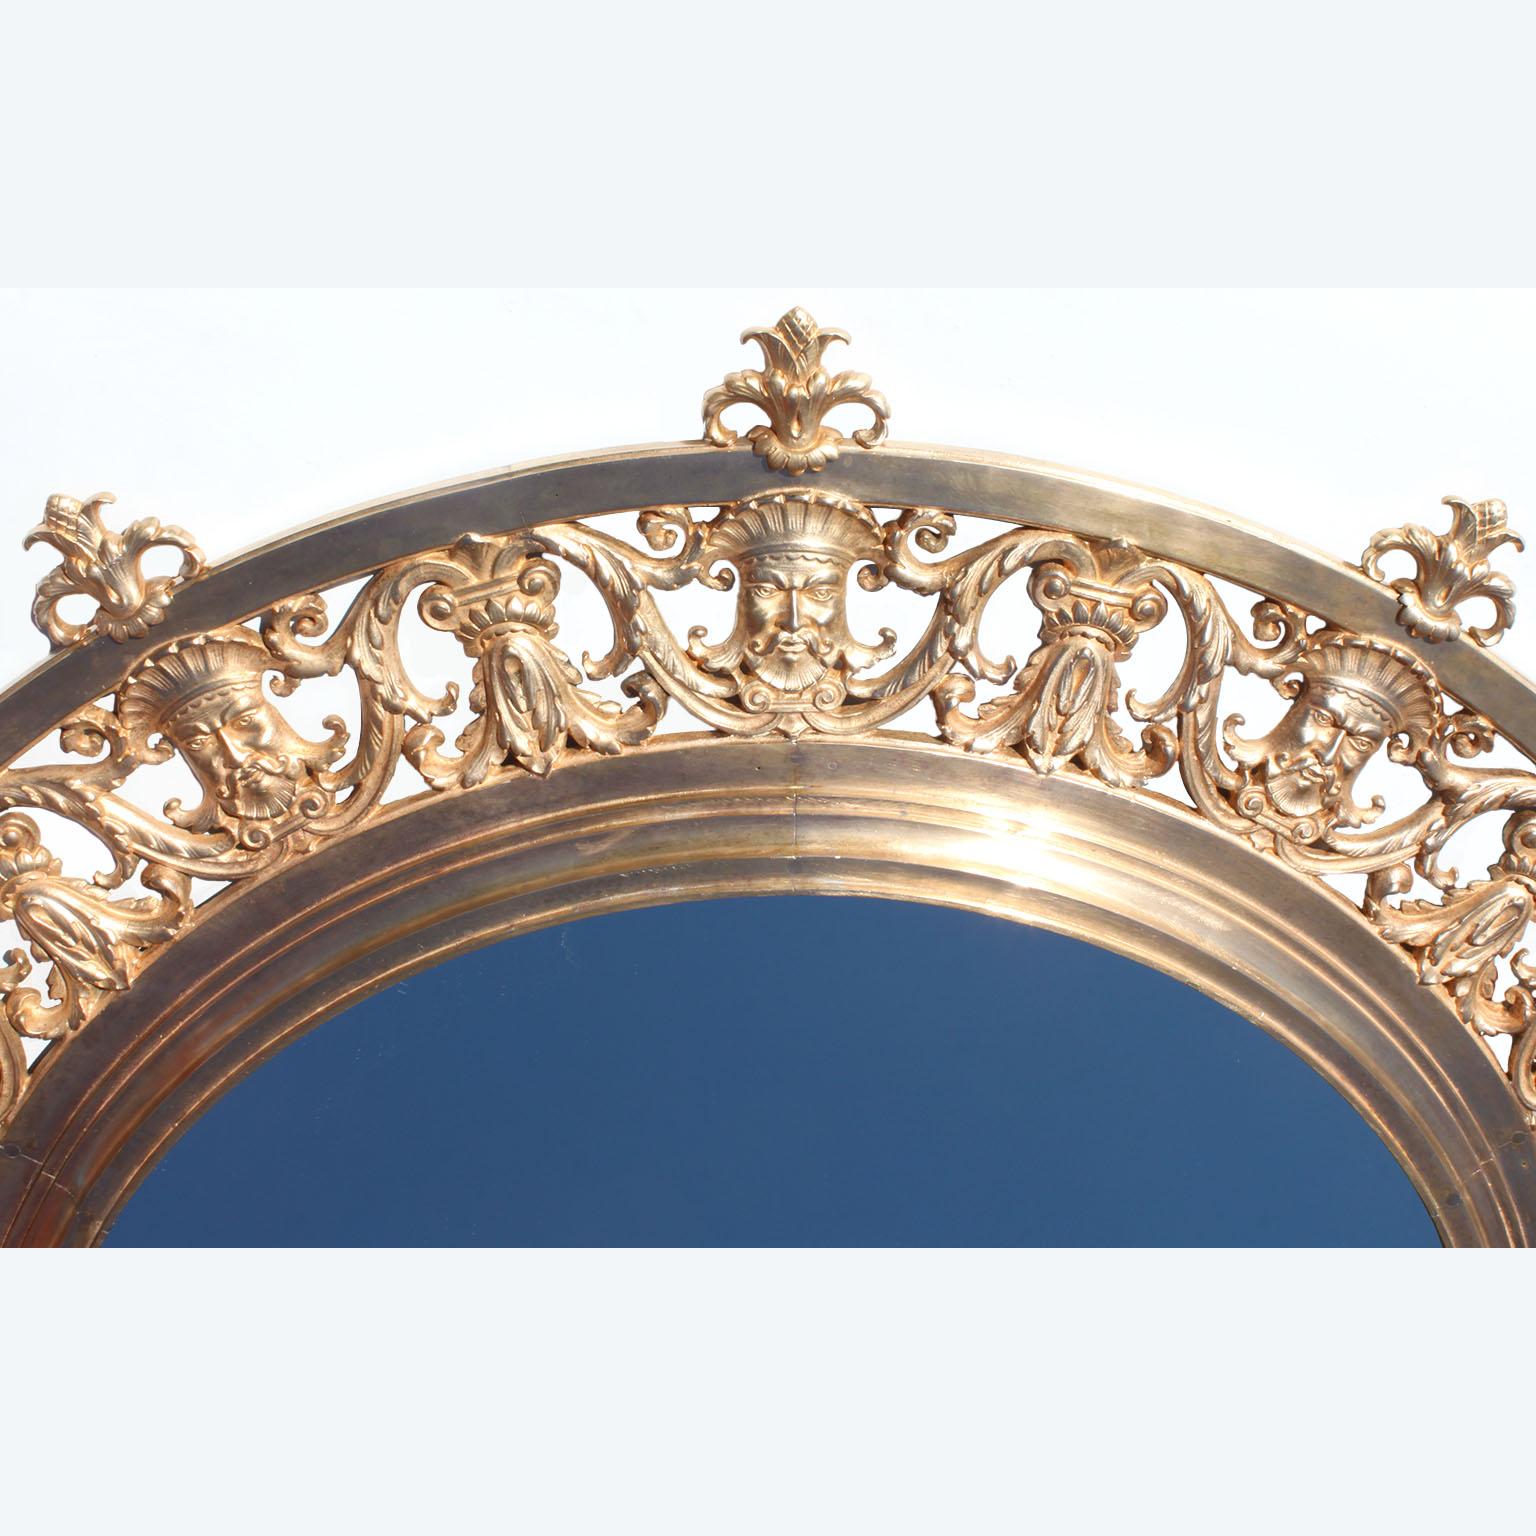 A fine and large circular 19th century Baroque Revival style gilt-bronze figural mirror. The ornately pierced foliate scrolled surround gilt-bronze frame decorated with allegorical male masks topped with acorns and centered with a circular mirror